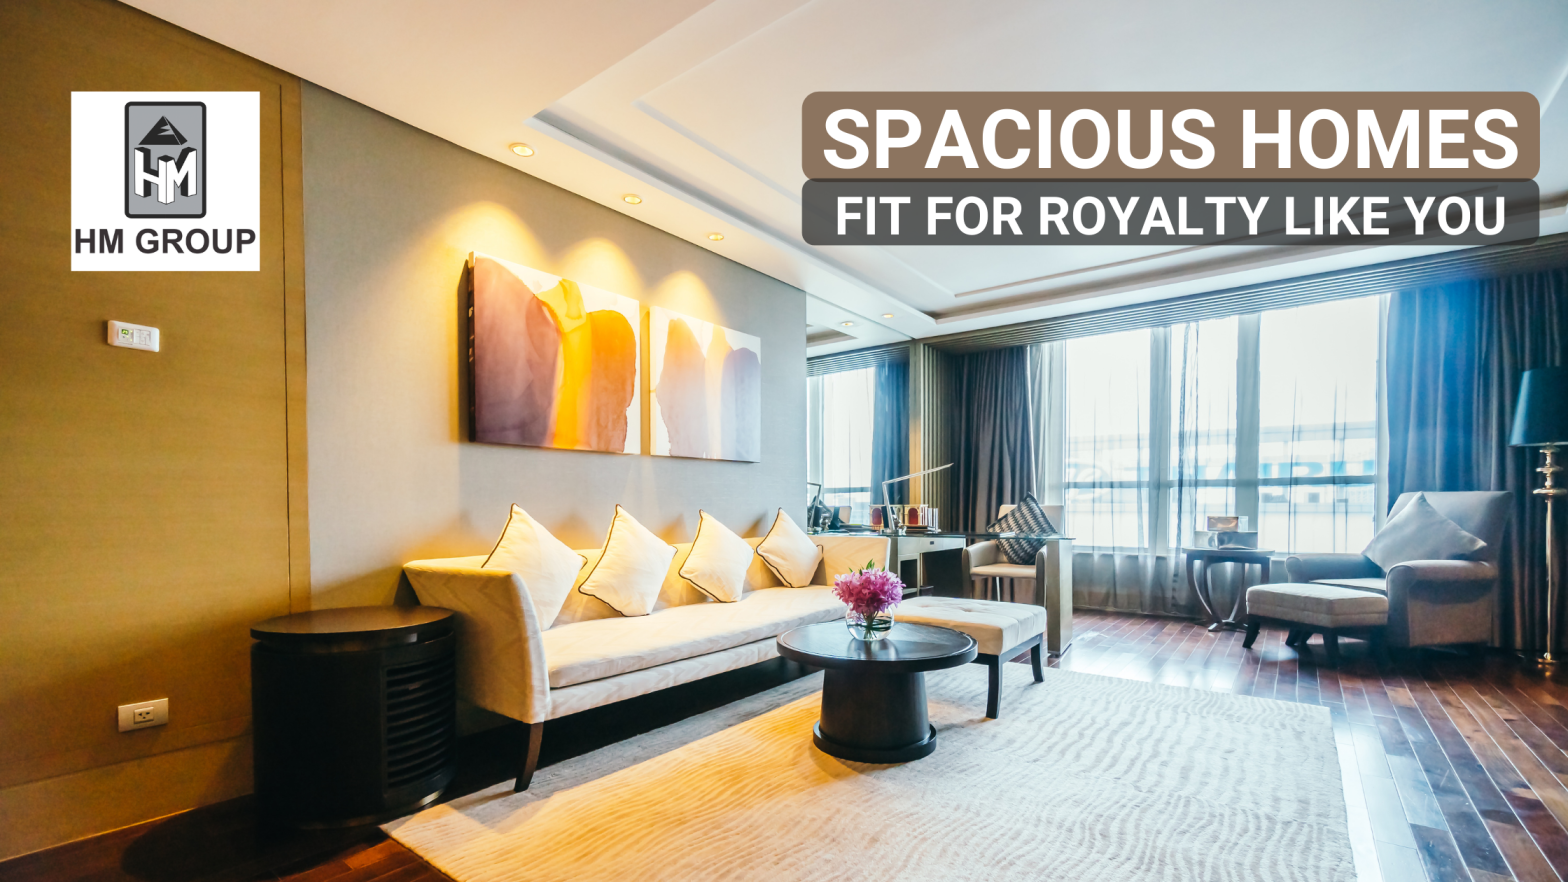 Spacious Homes Fit For Royalty Like You